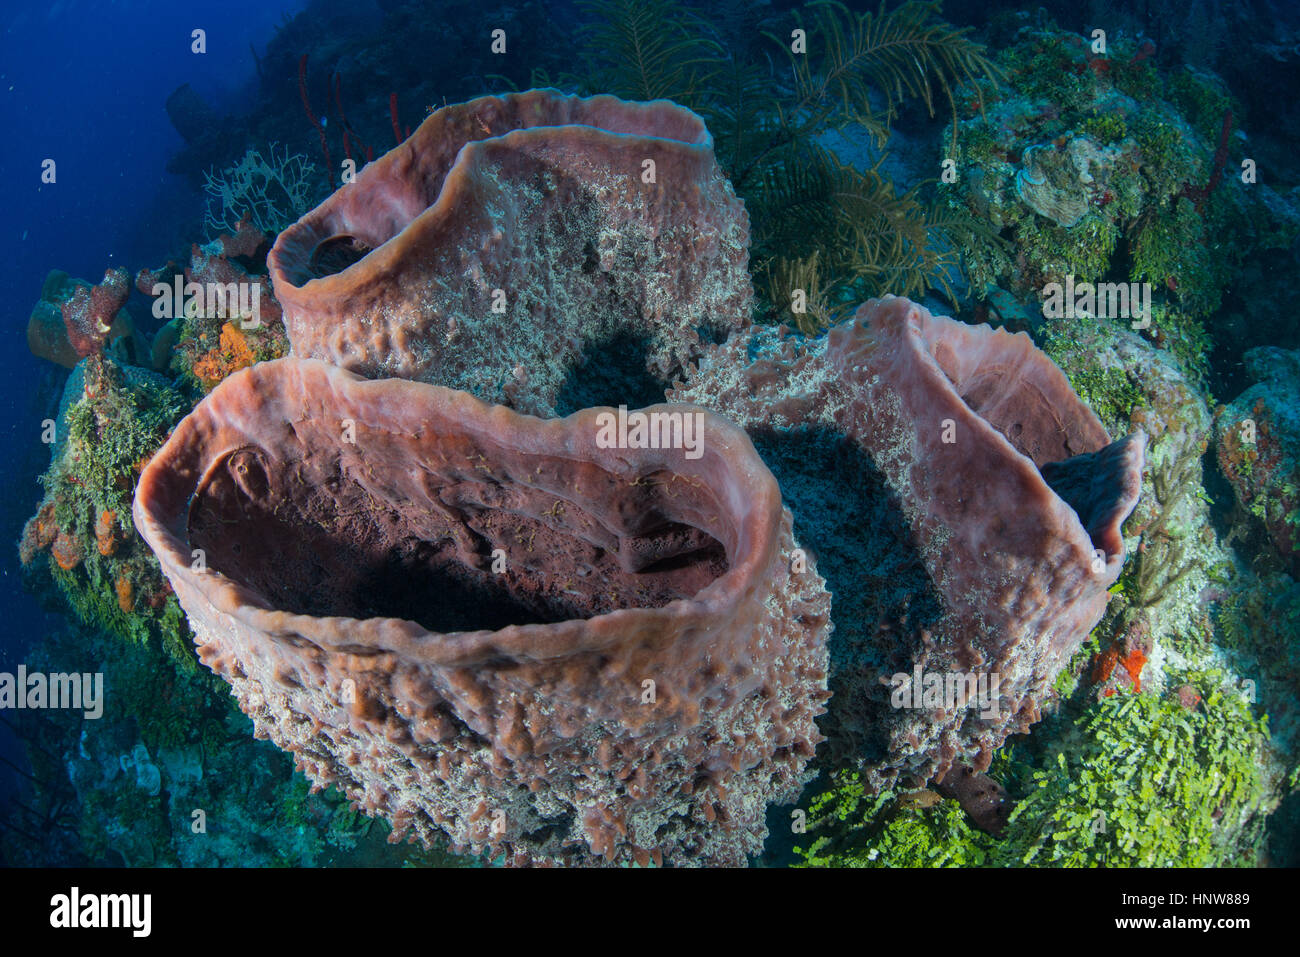 Massive sponges at unspoiled reefs, Chinchorro Banks, Quintana Roo, Mexico Stock Photo